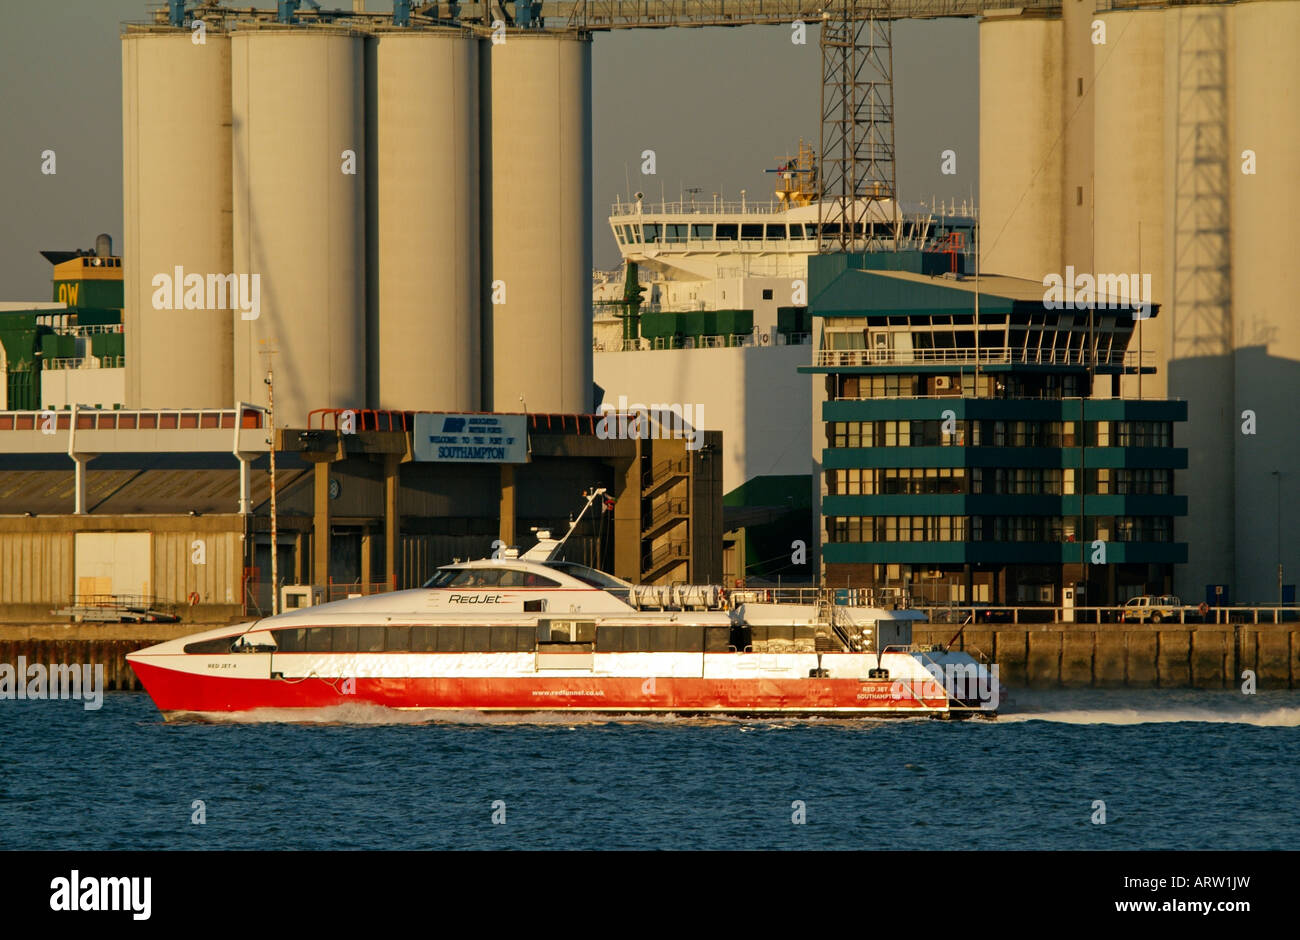 Port of Southampton ABP Building Red Jet 4 Passenger Ferry Stock Photo